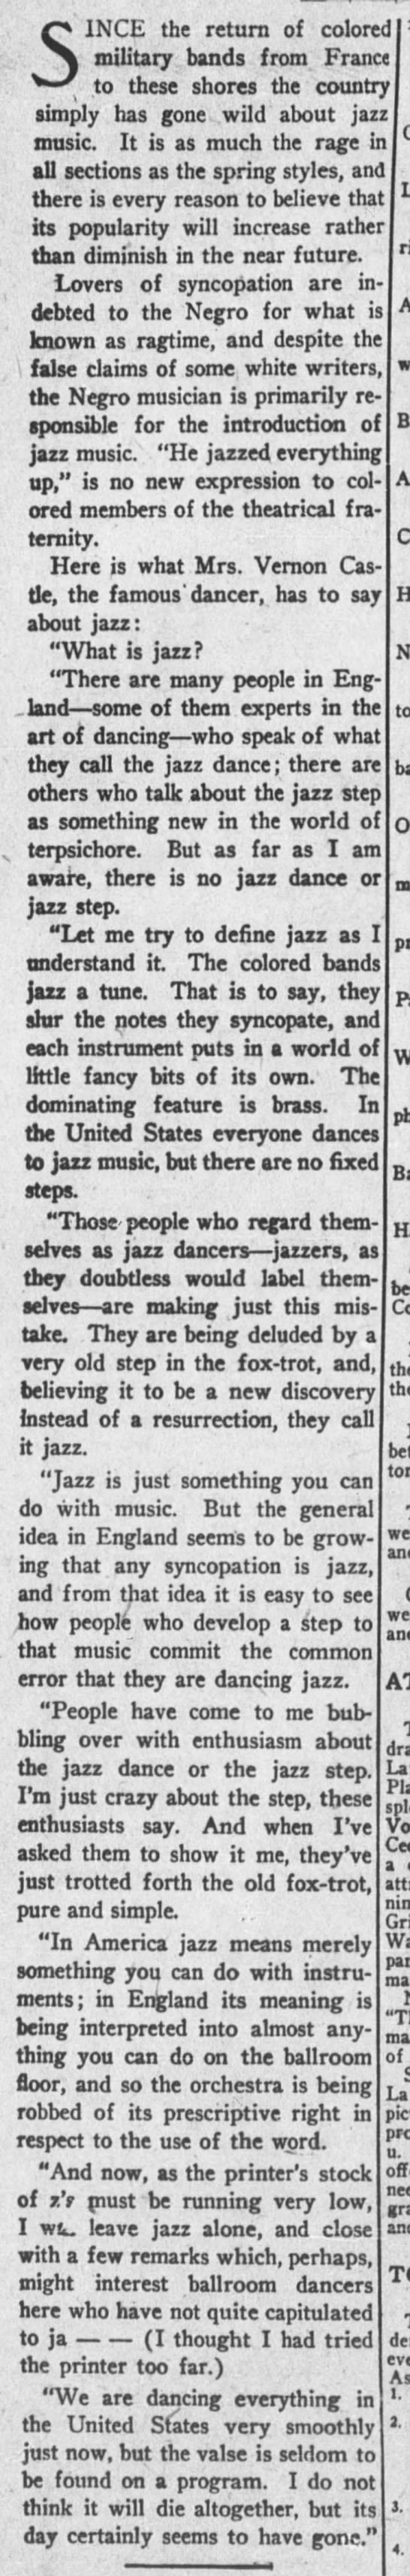 1919 article says United States "simply has gone wild about jazz music" - 